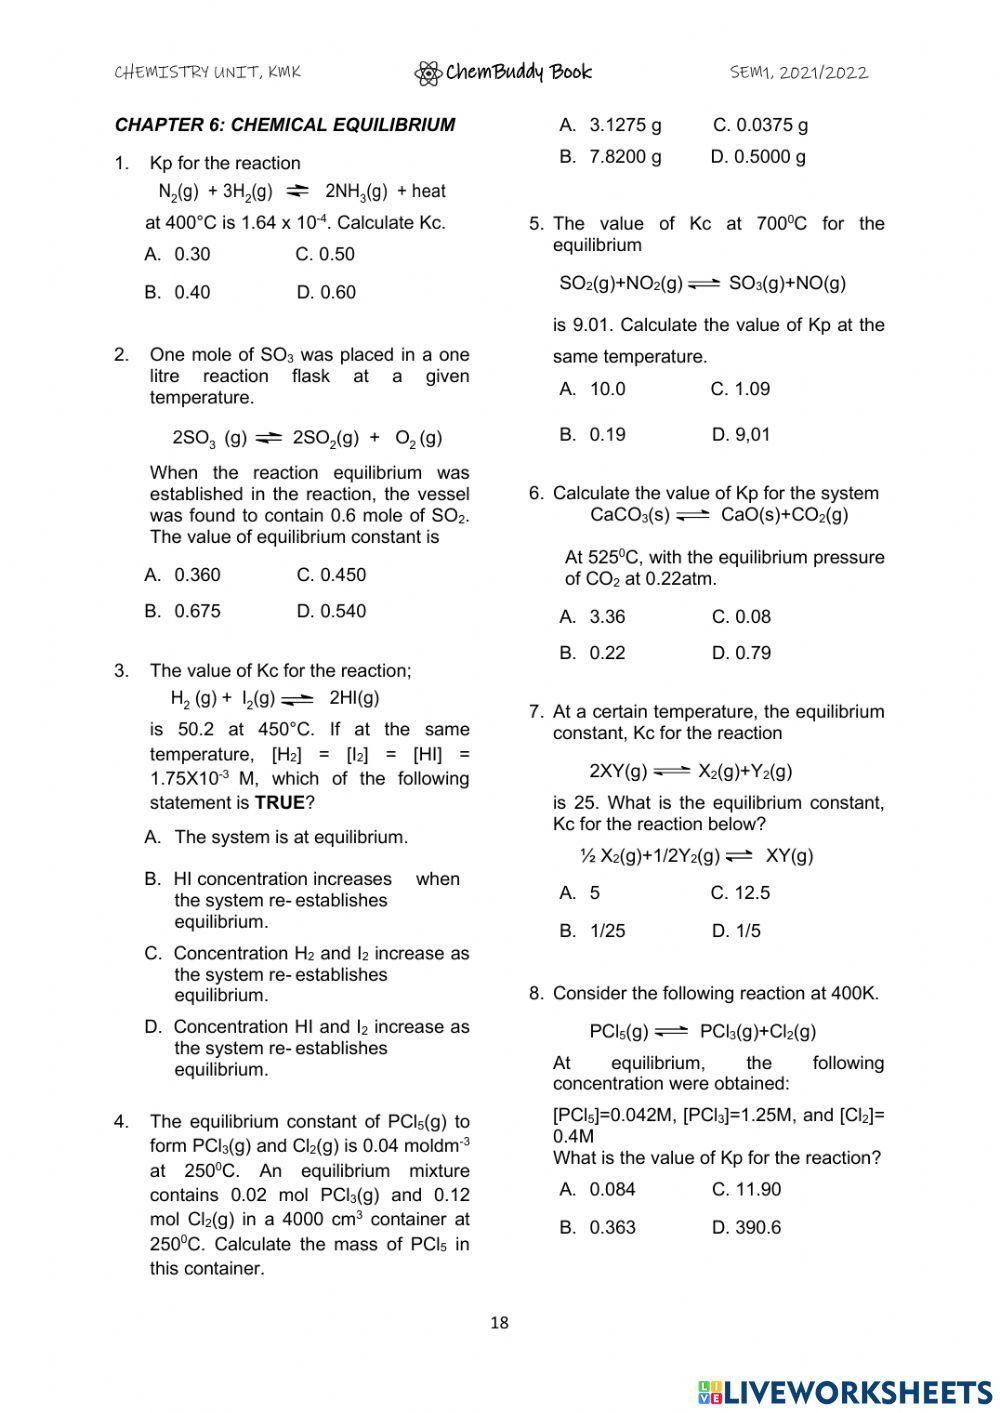 Chembuddy chemical equilibrium page 1